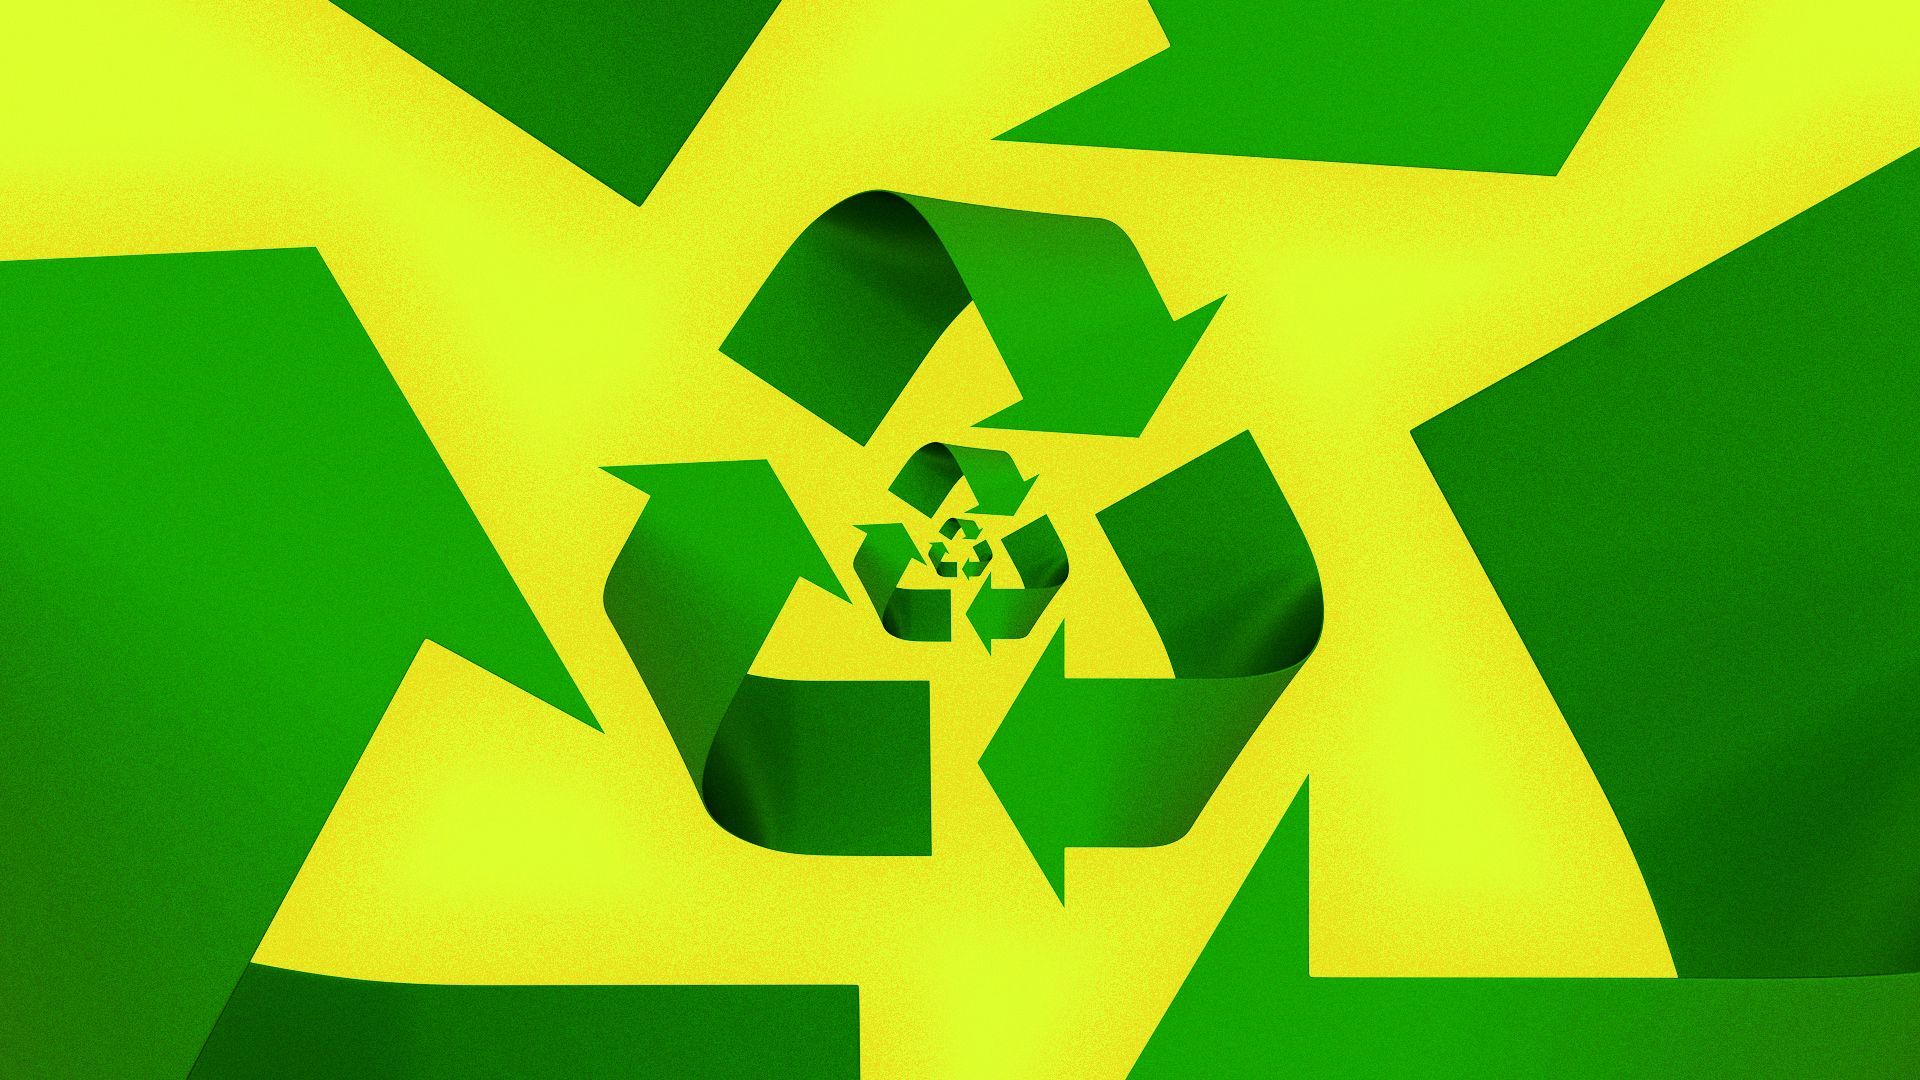 Illustration of a recycling symbol repeating pattern. 